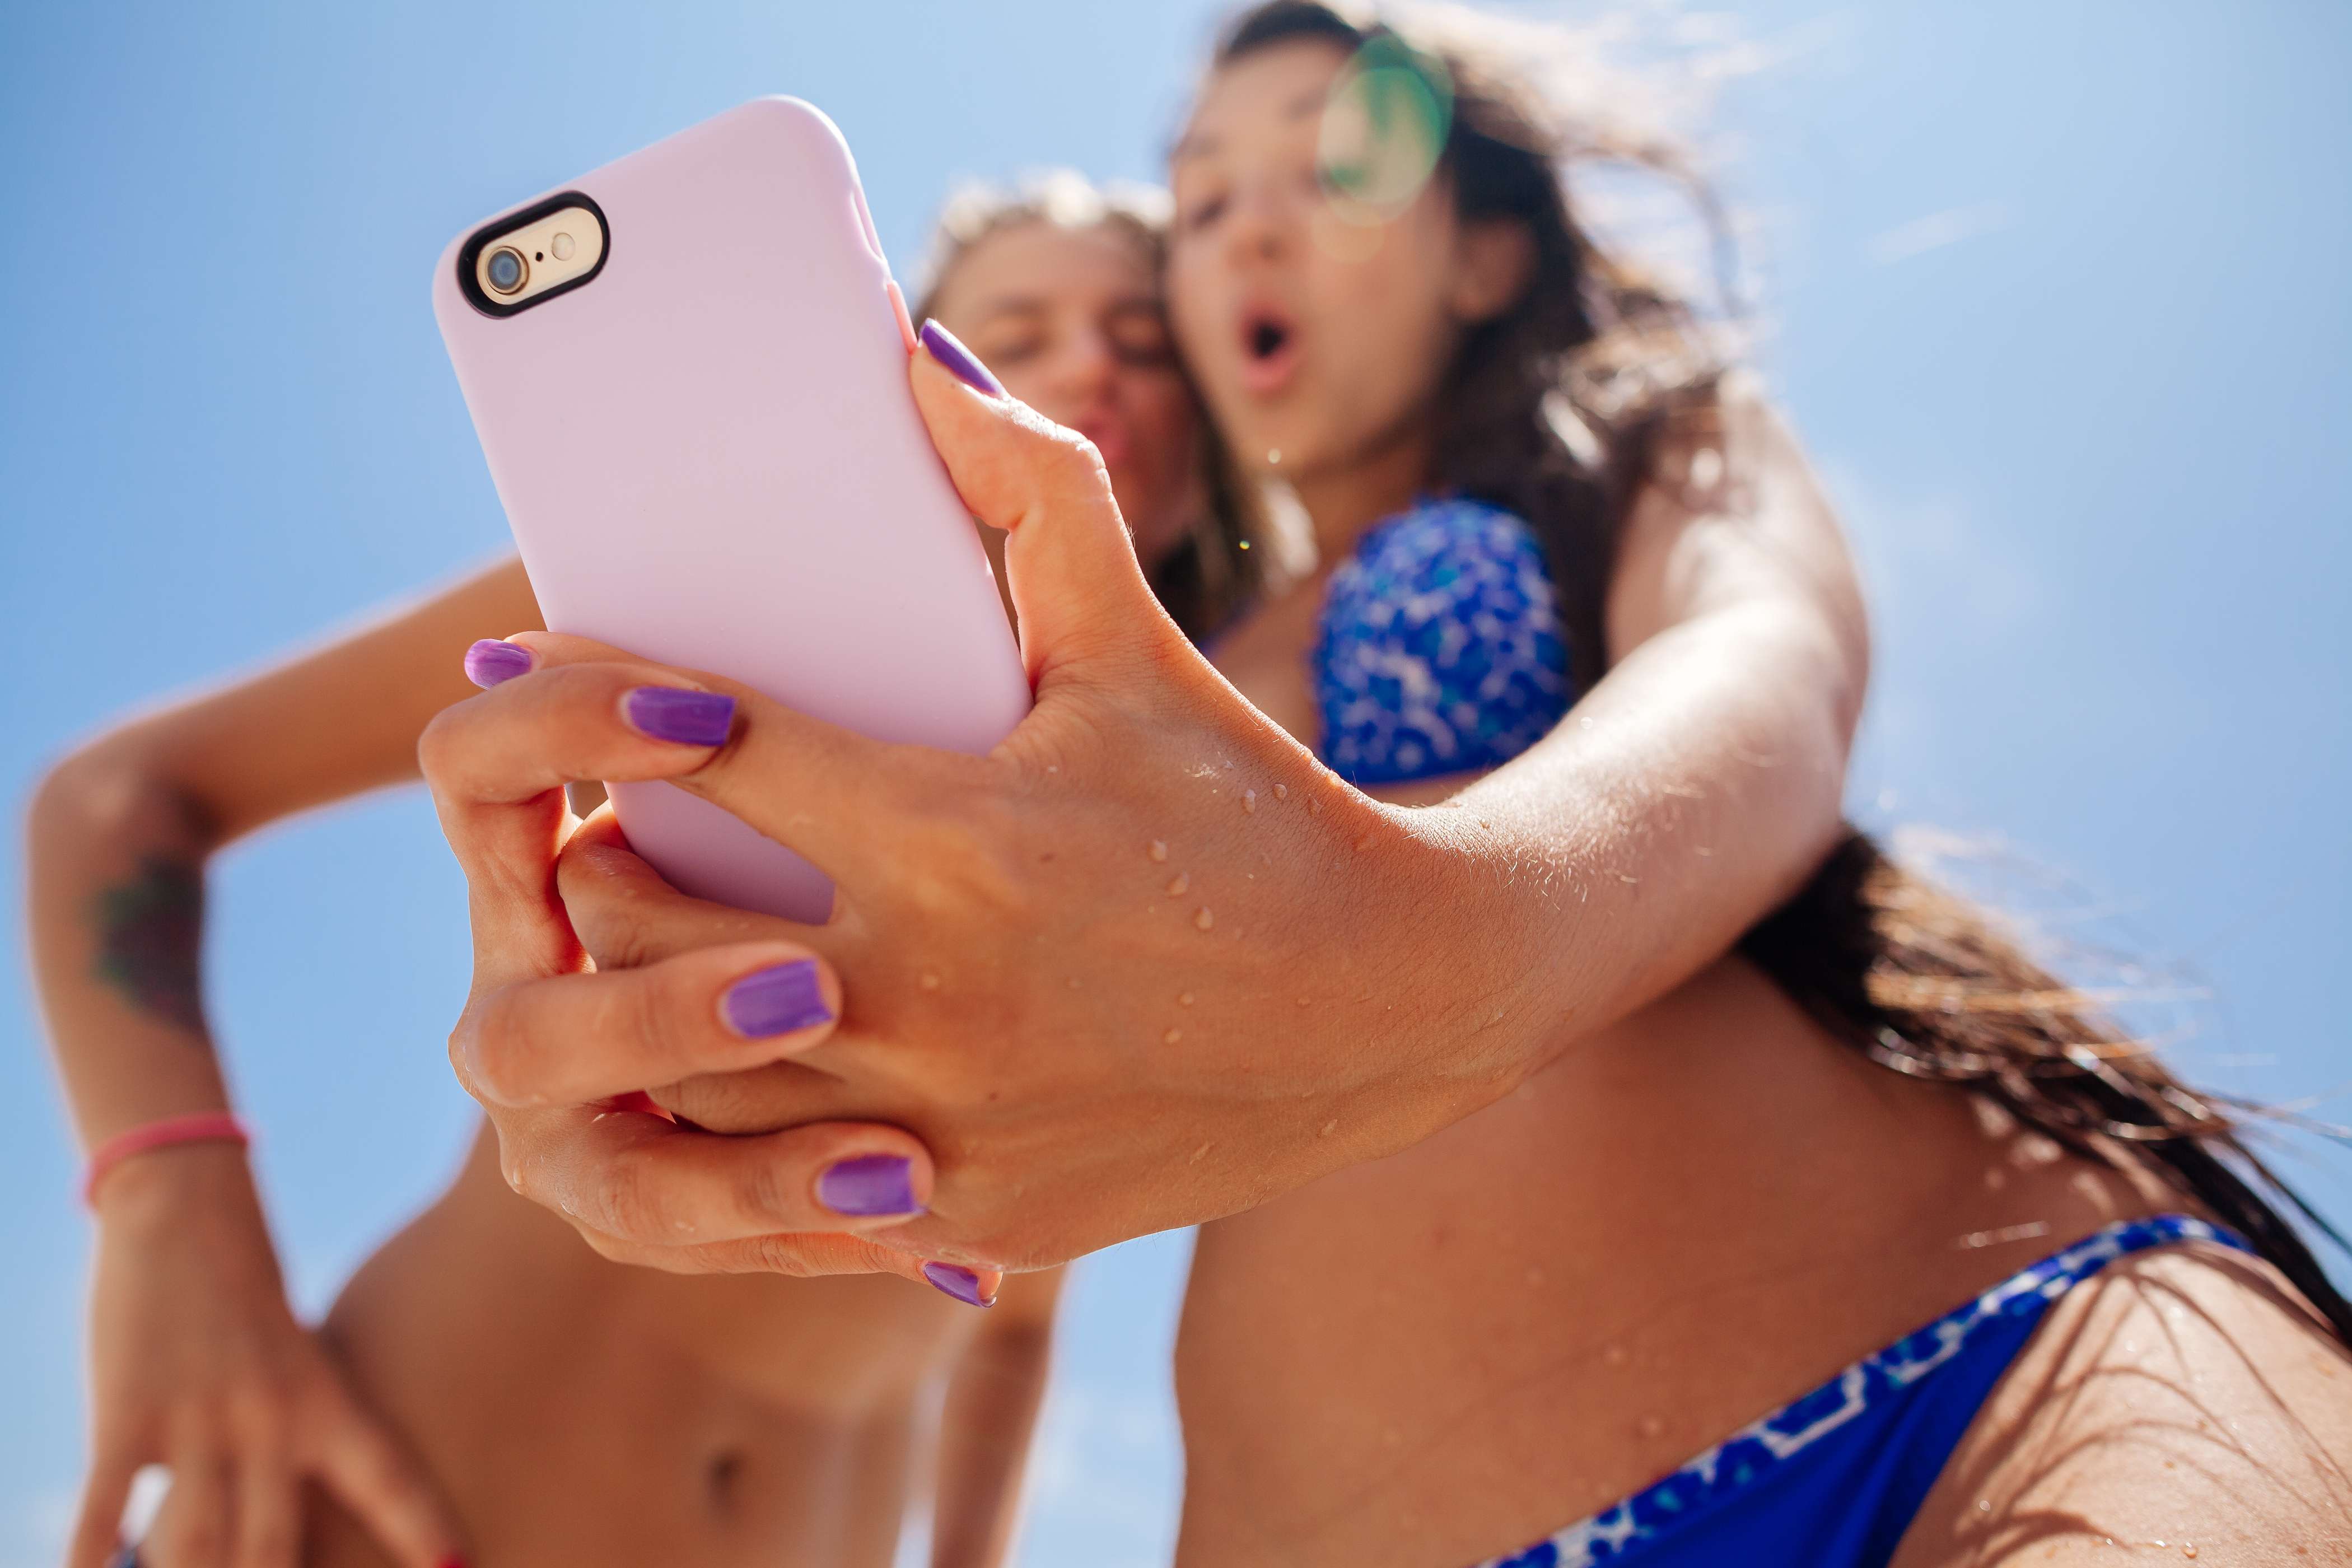 Go on, take that selfie, you may not be a narcissist.